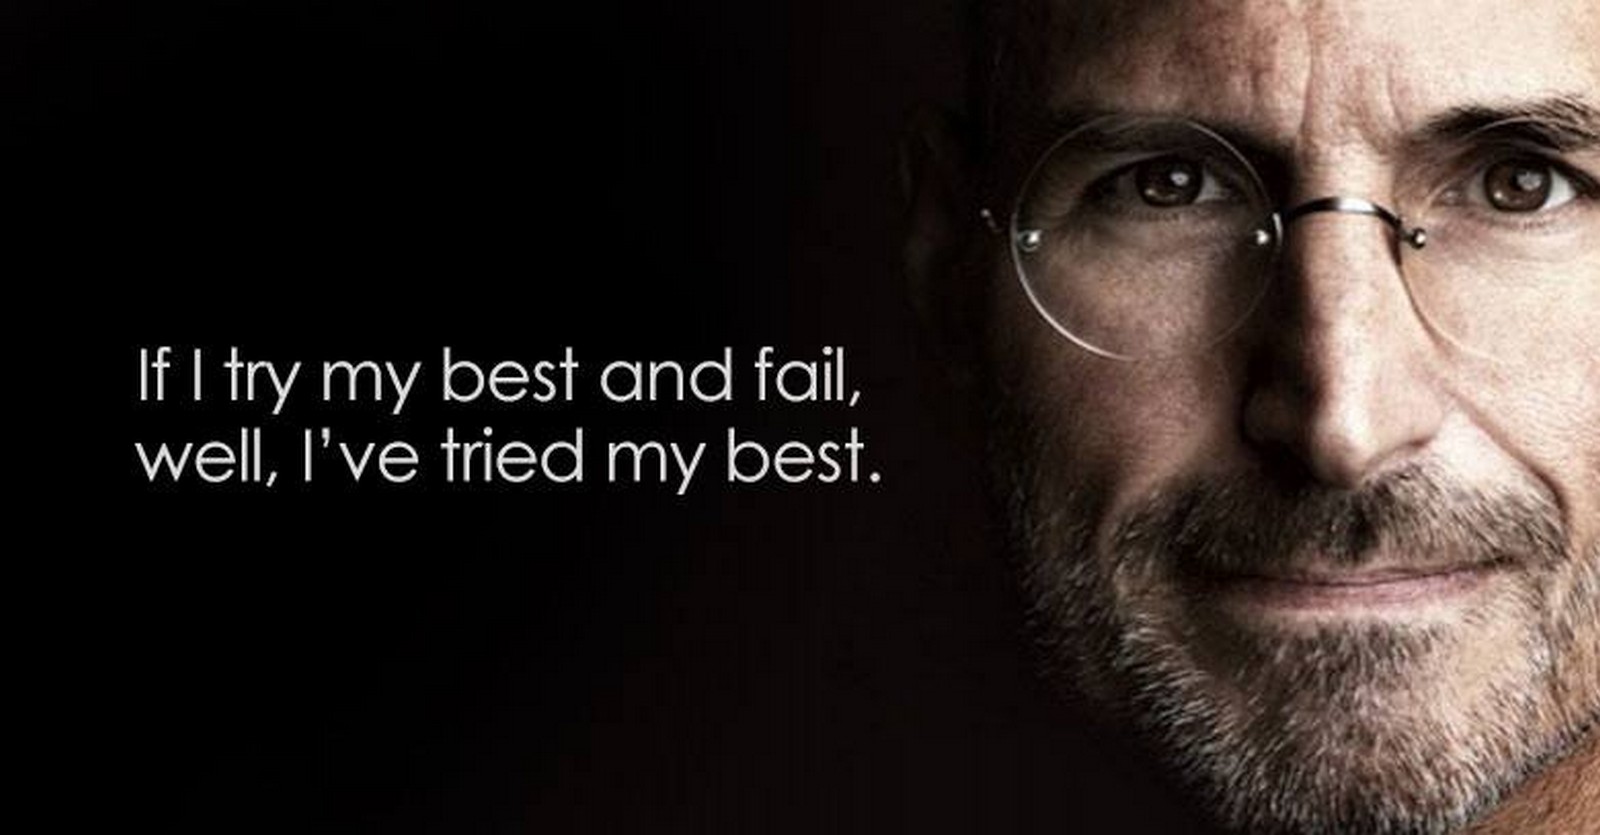 19 Best Steve Jobs Quotes - "If I try my best and fail, well, I've tried my best."